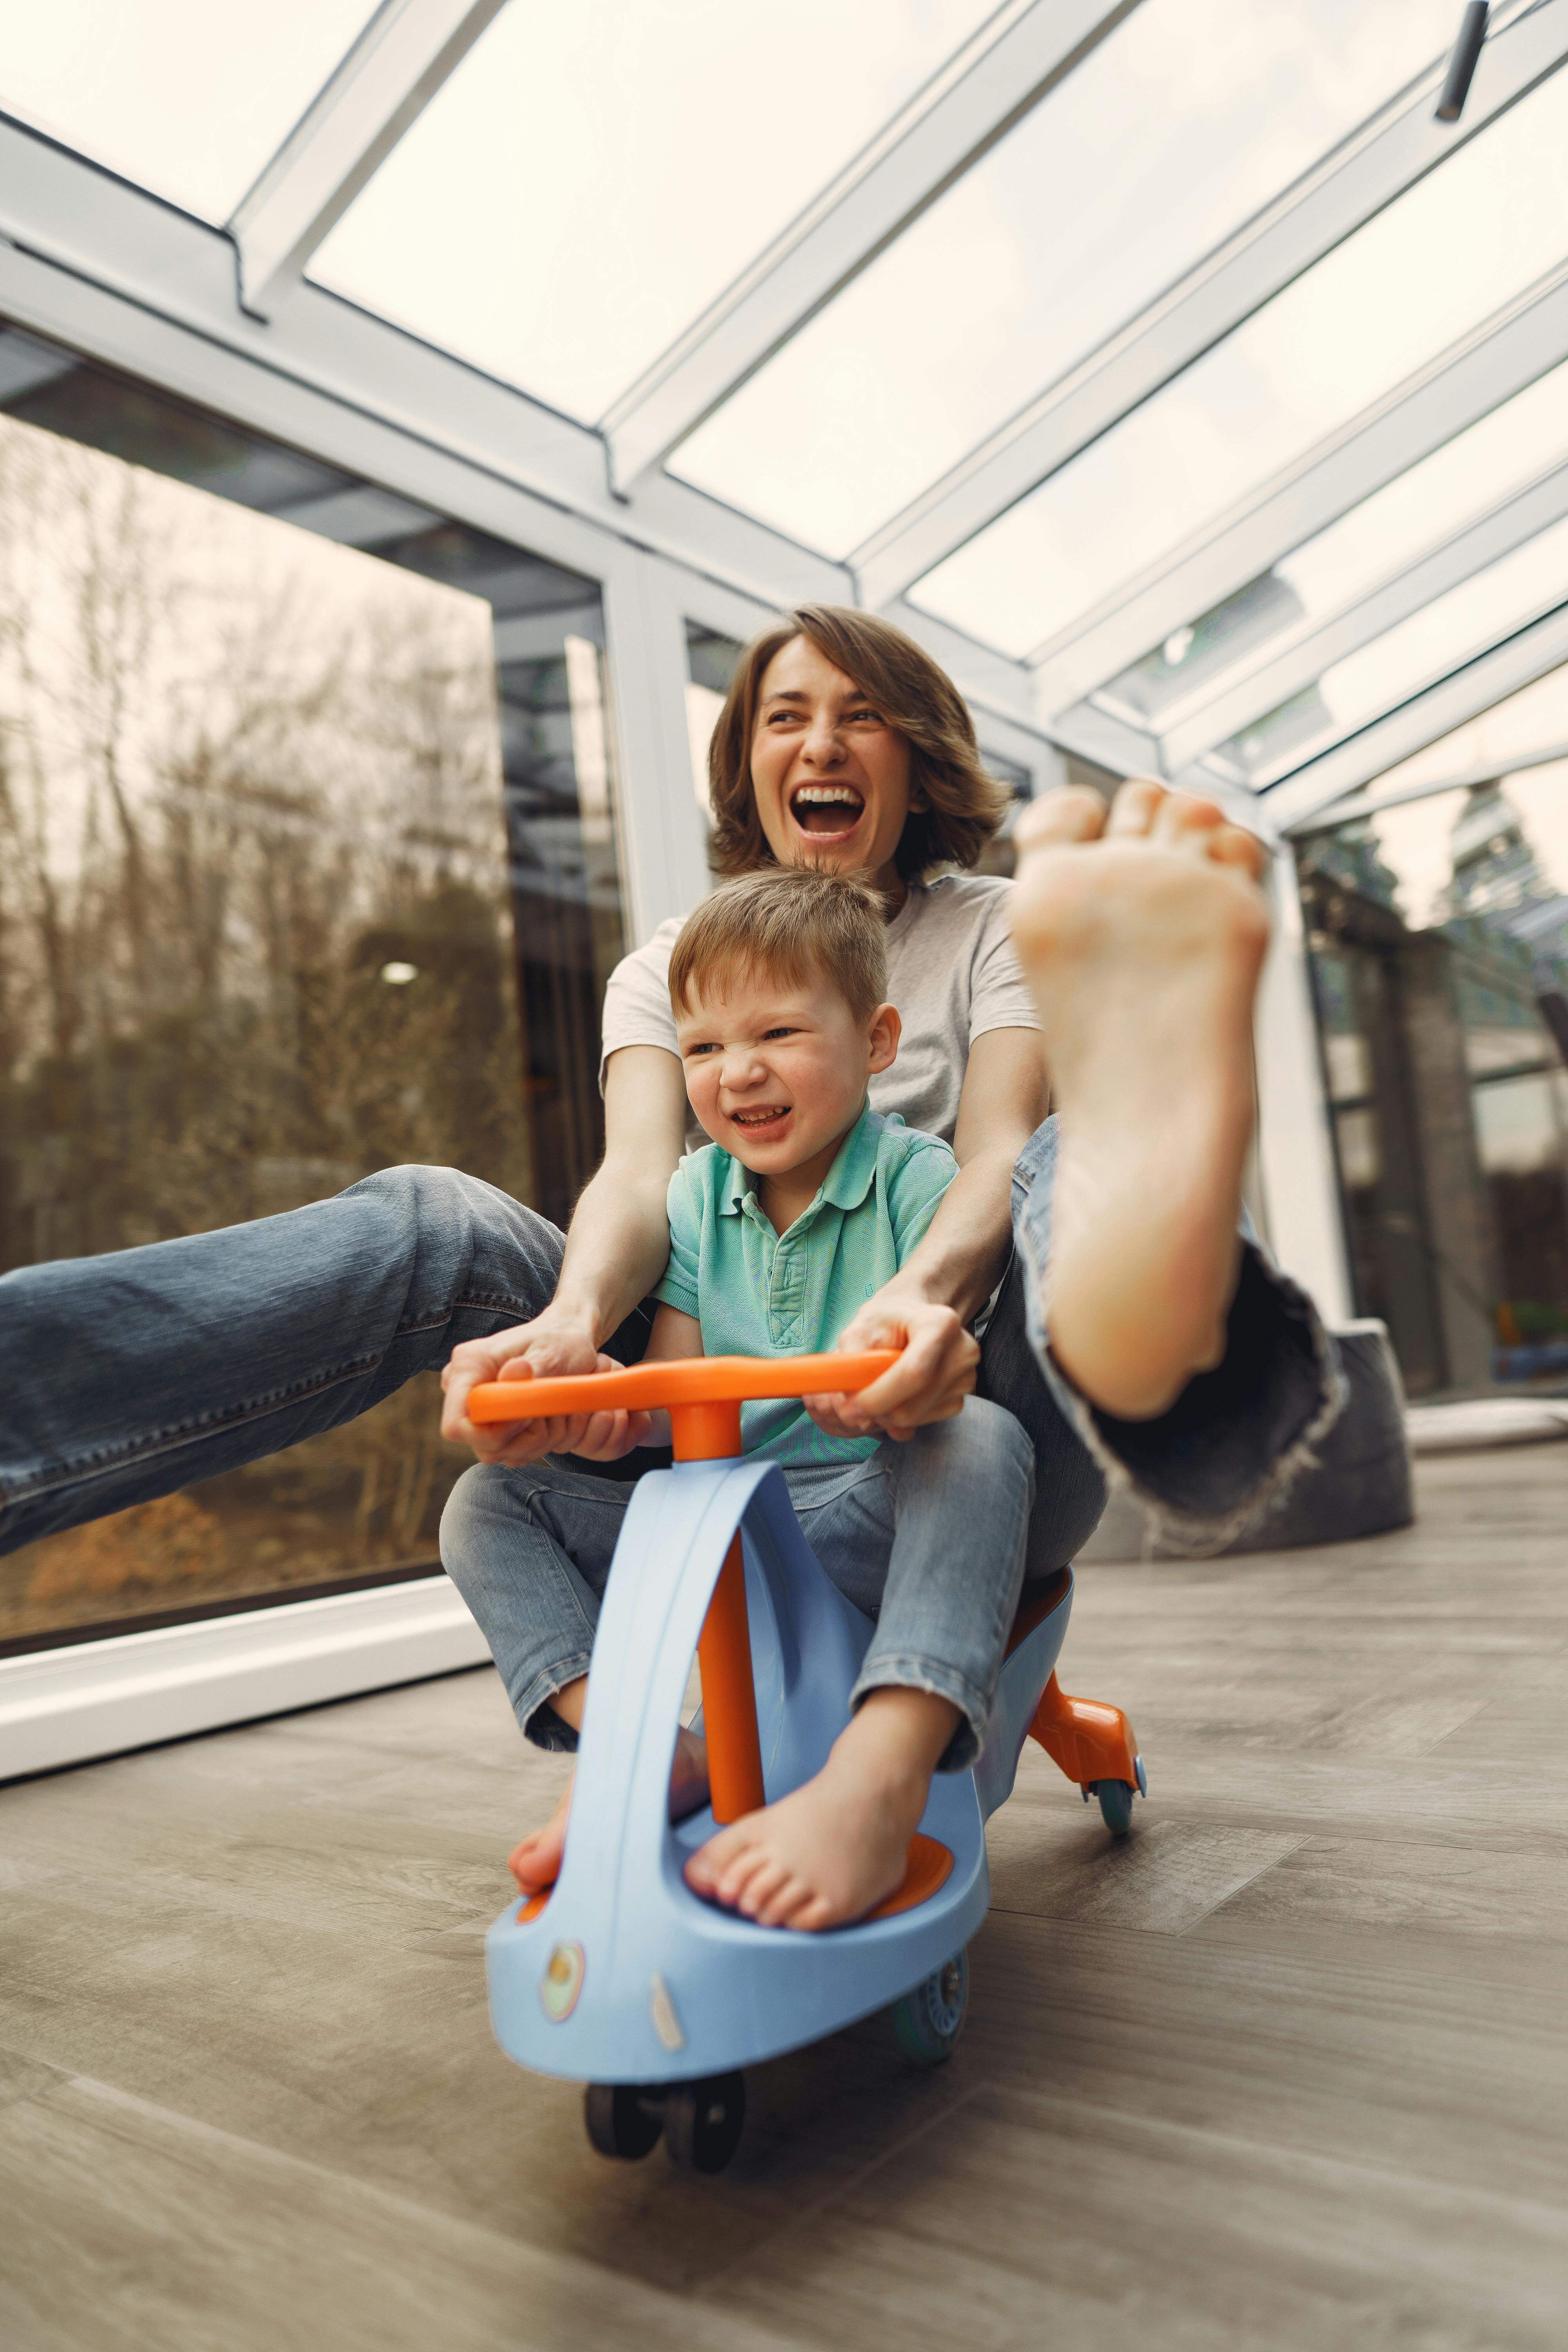 A happy woman playing with her son | Source: Pexels